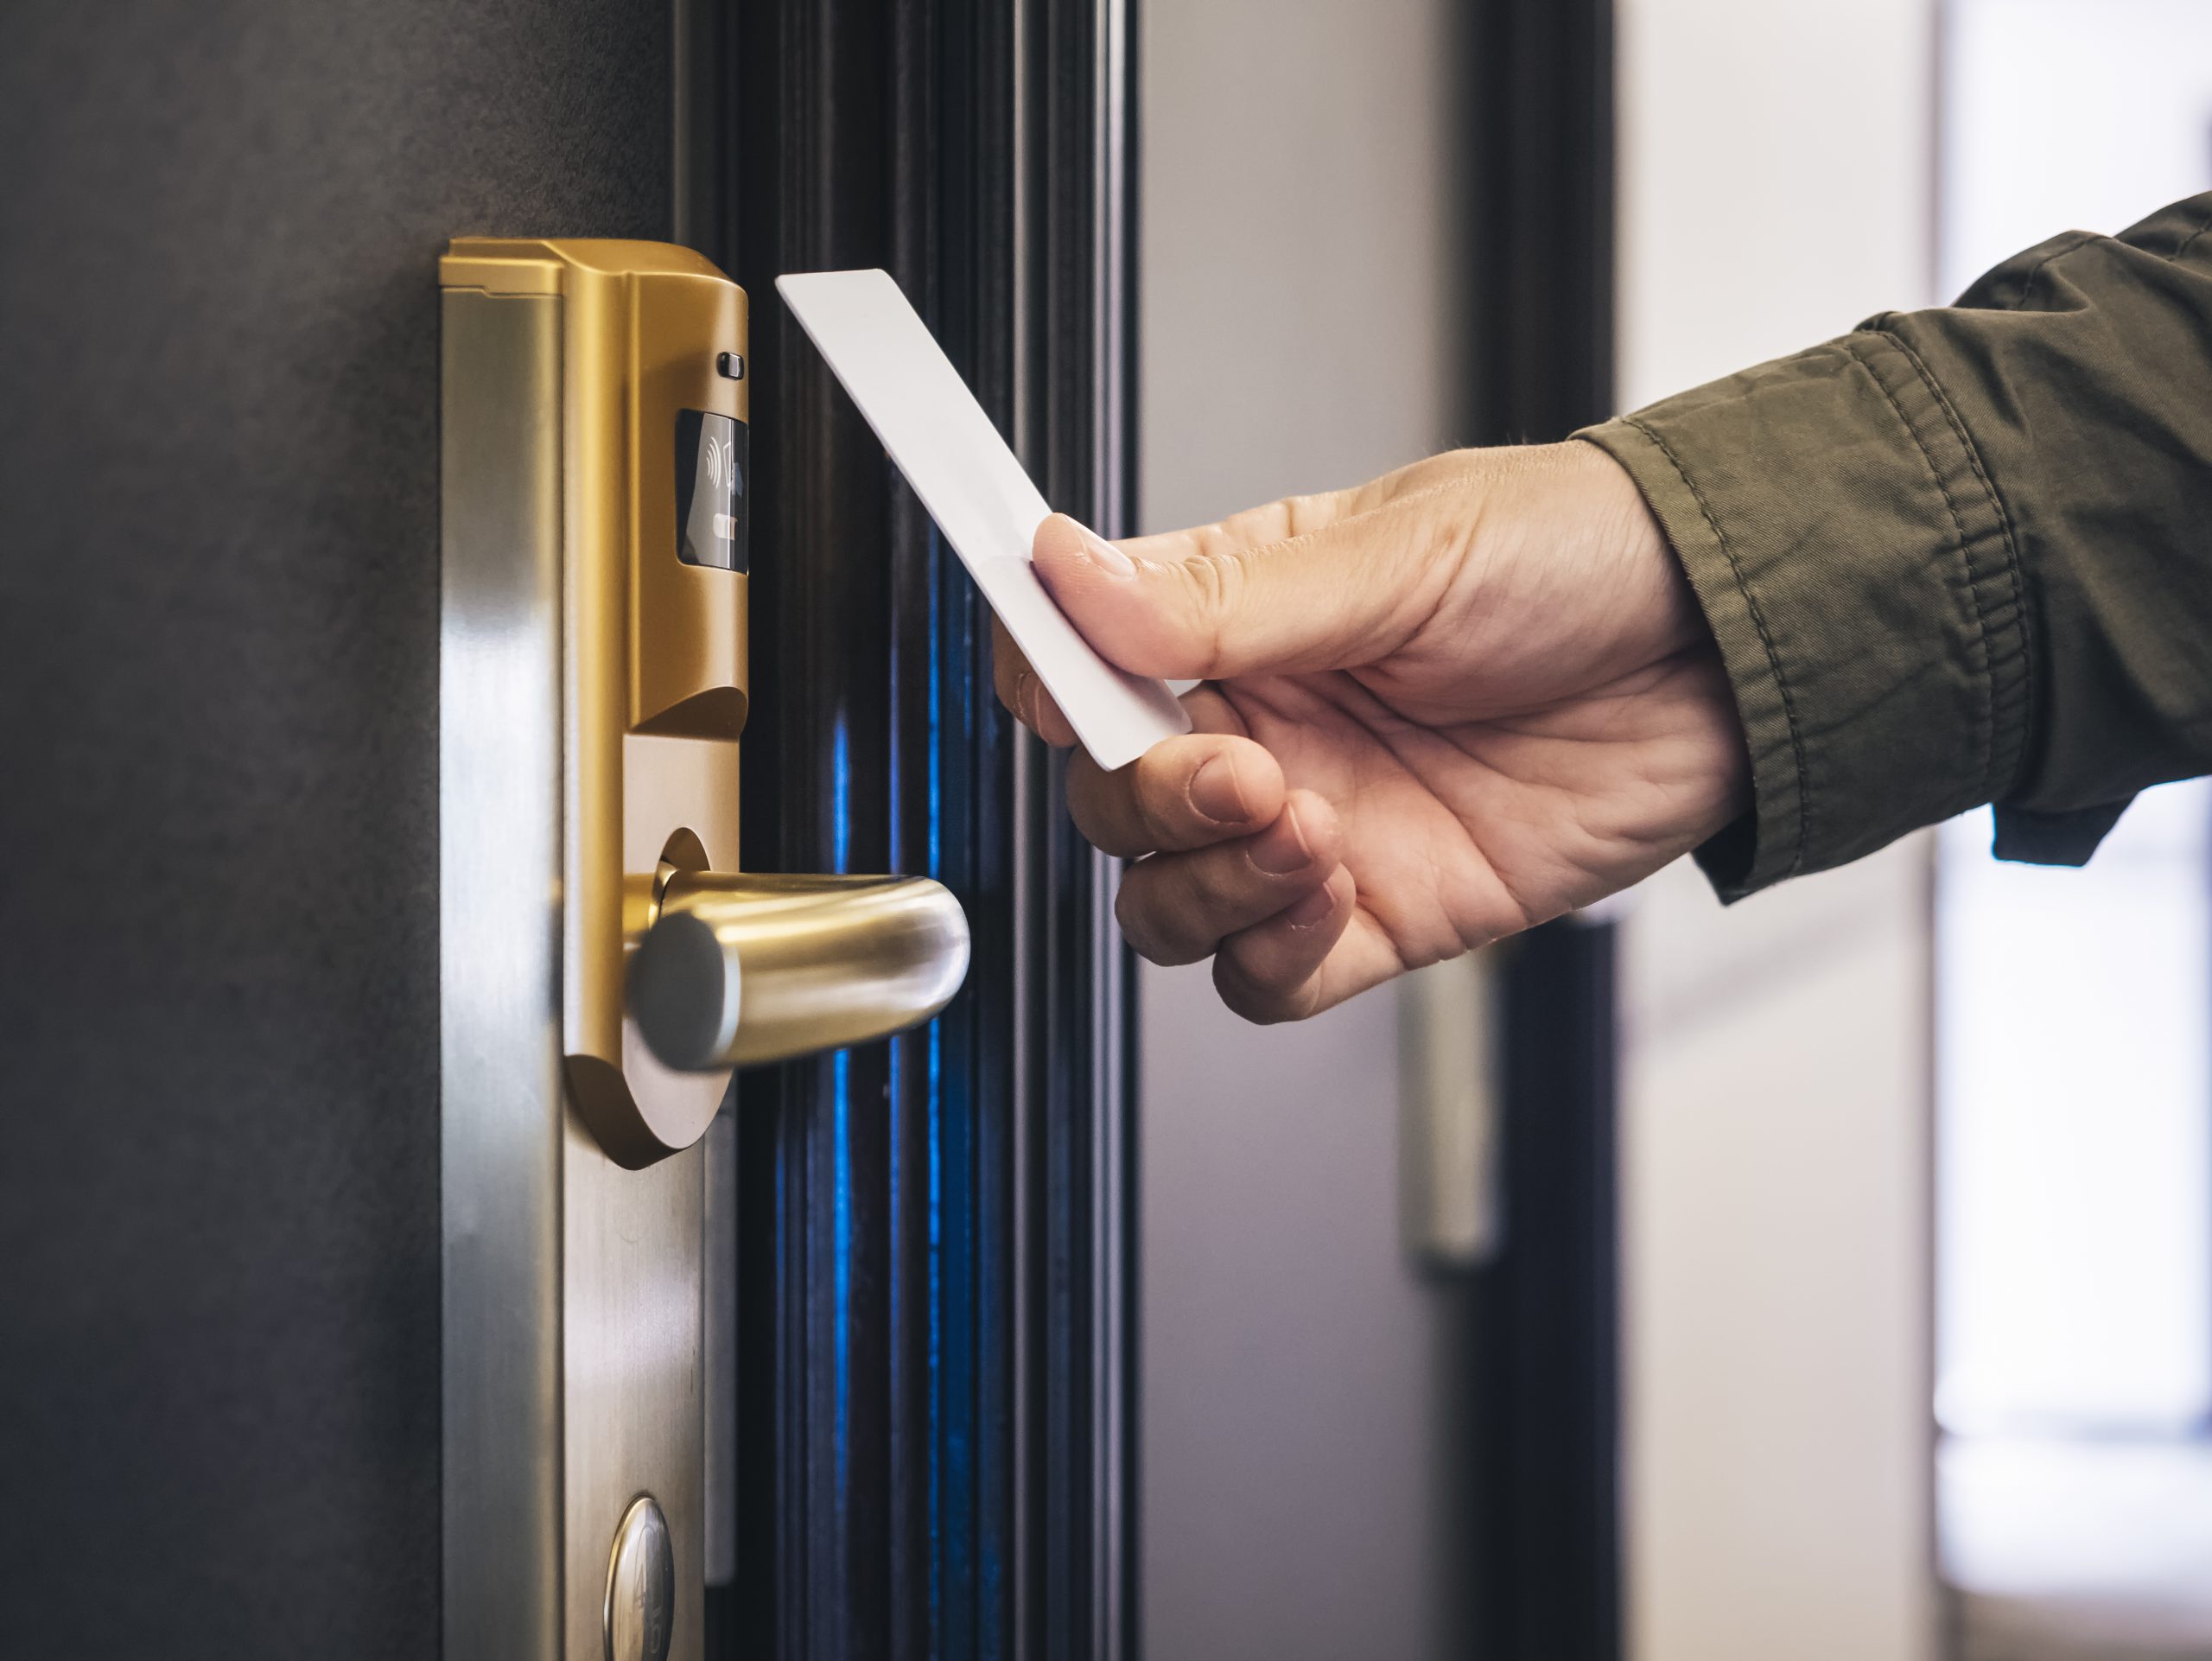 A feature of contactless motels, a code or swipe card serves as a digital room key, granting them access to their accommodation upon arrival.